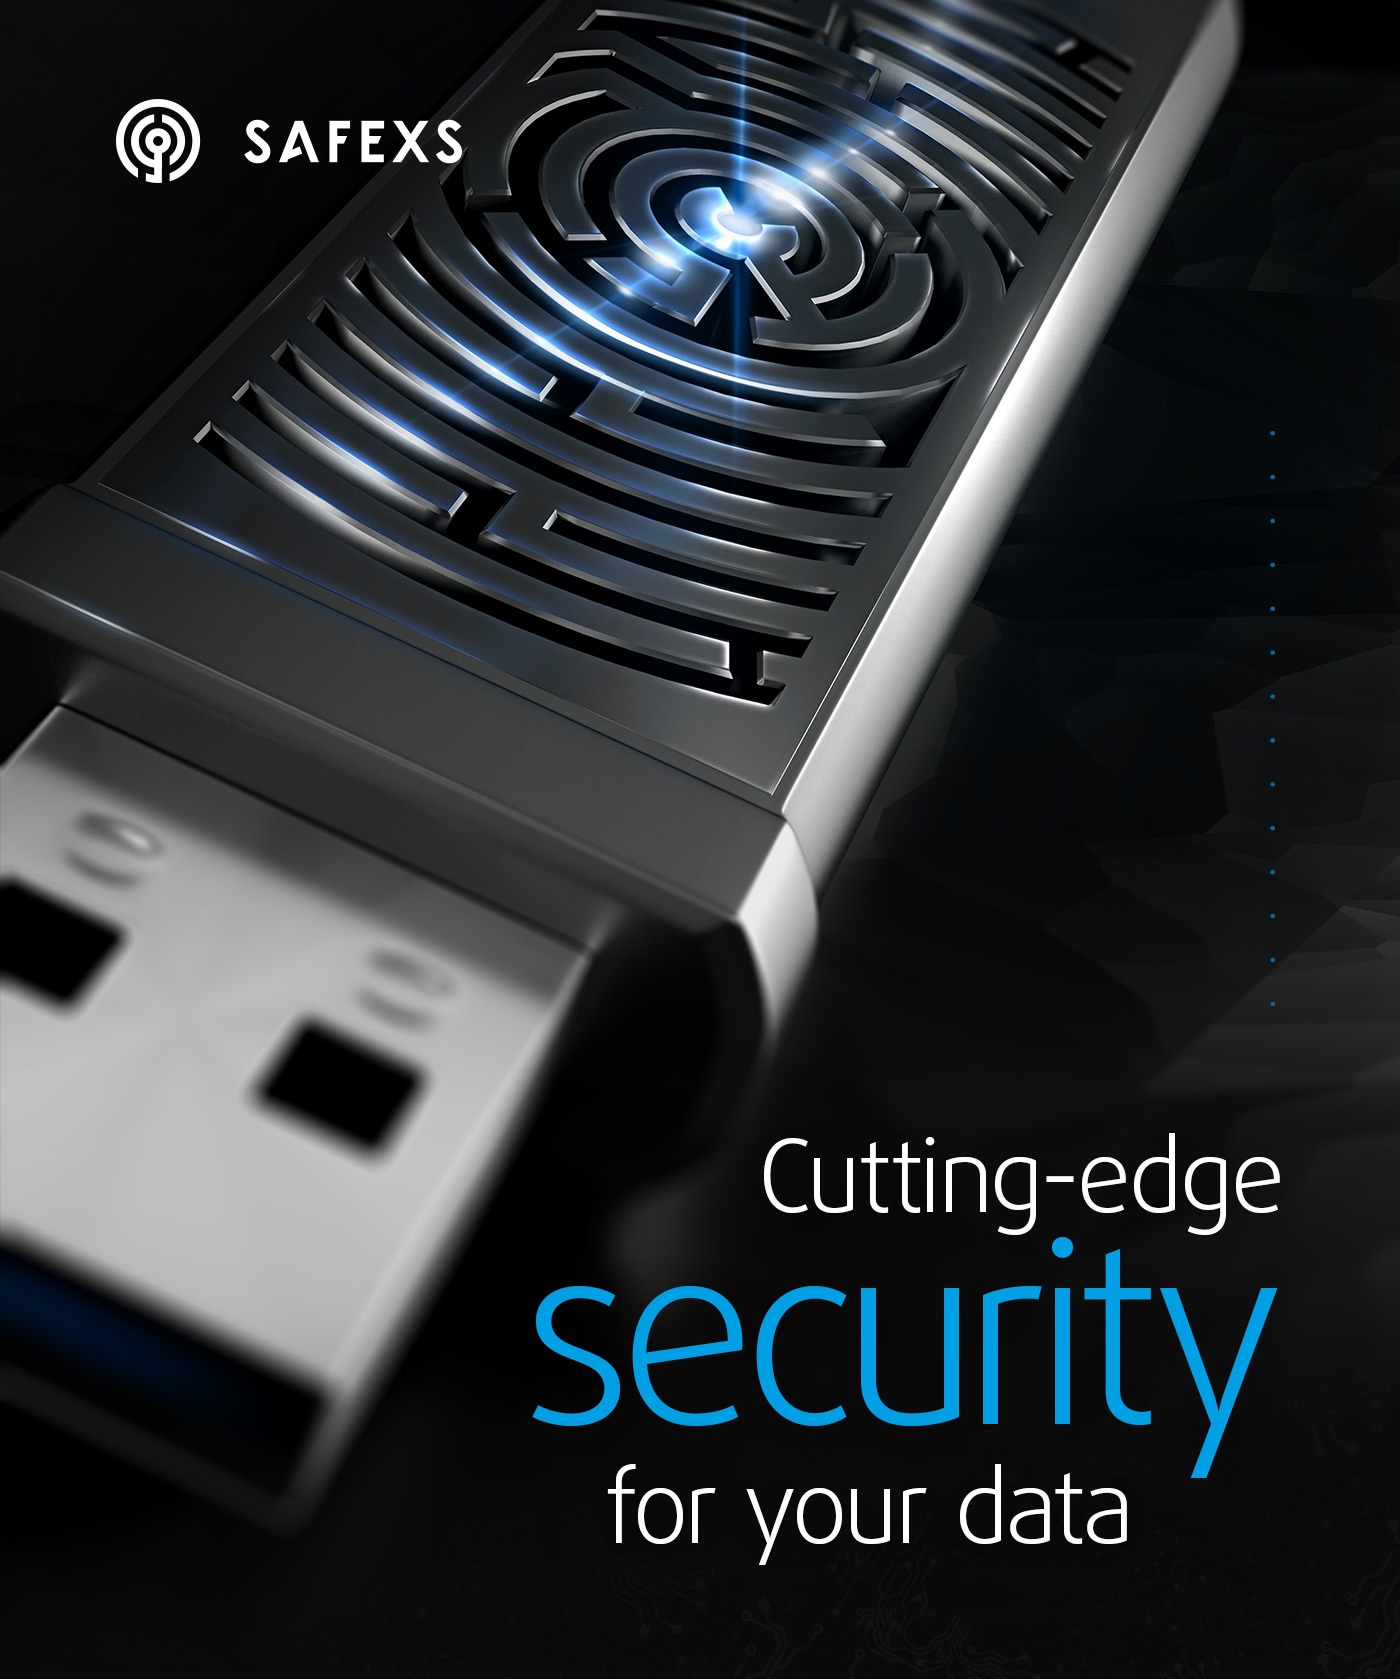 security pendrive protection guard 3D key visual Data Render